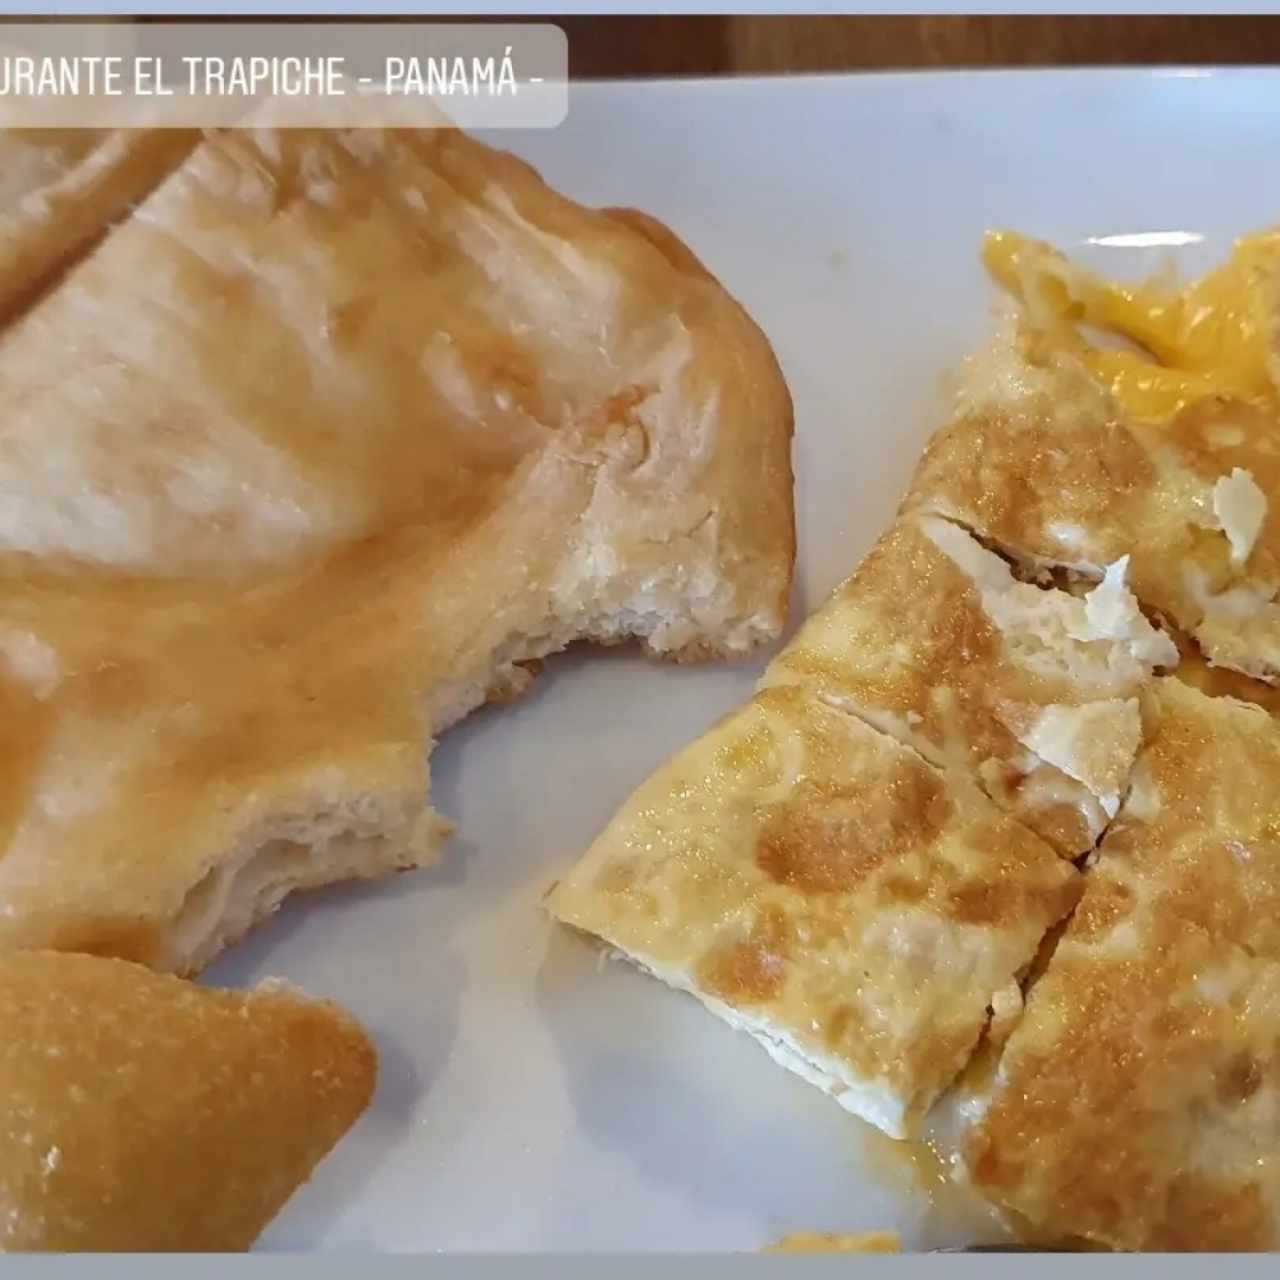 omelet queso + hojaldre + carimañola